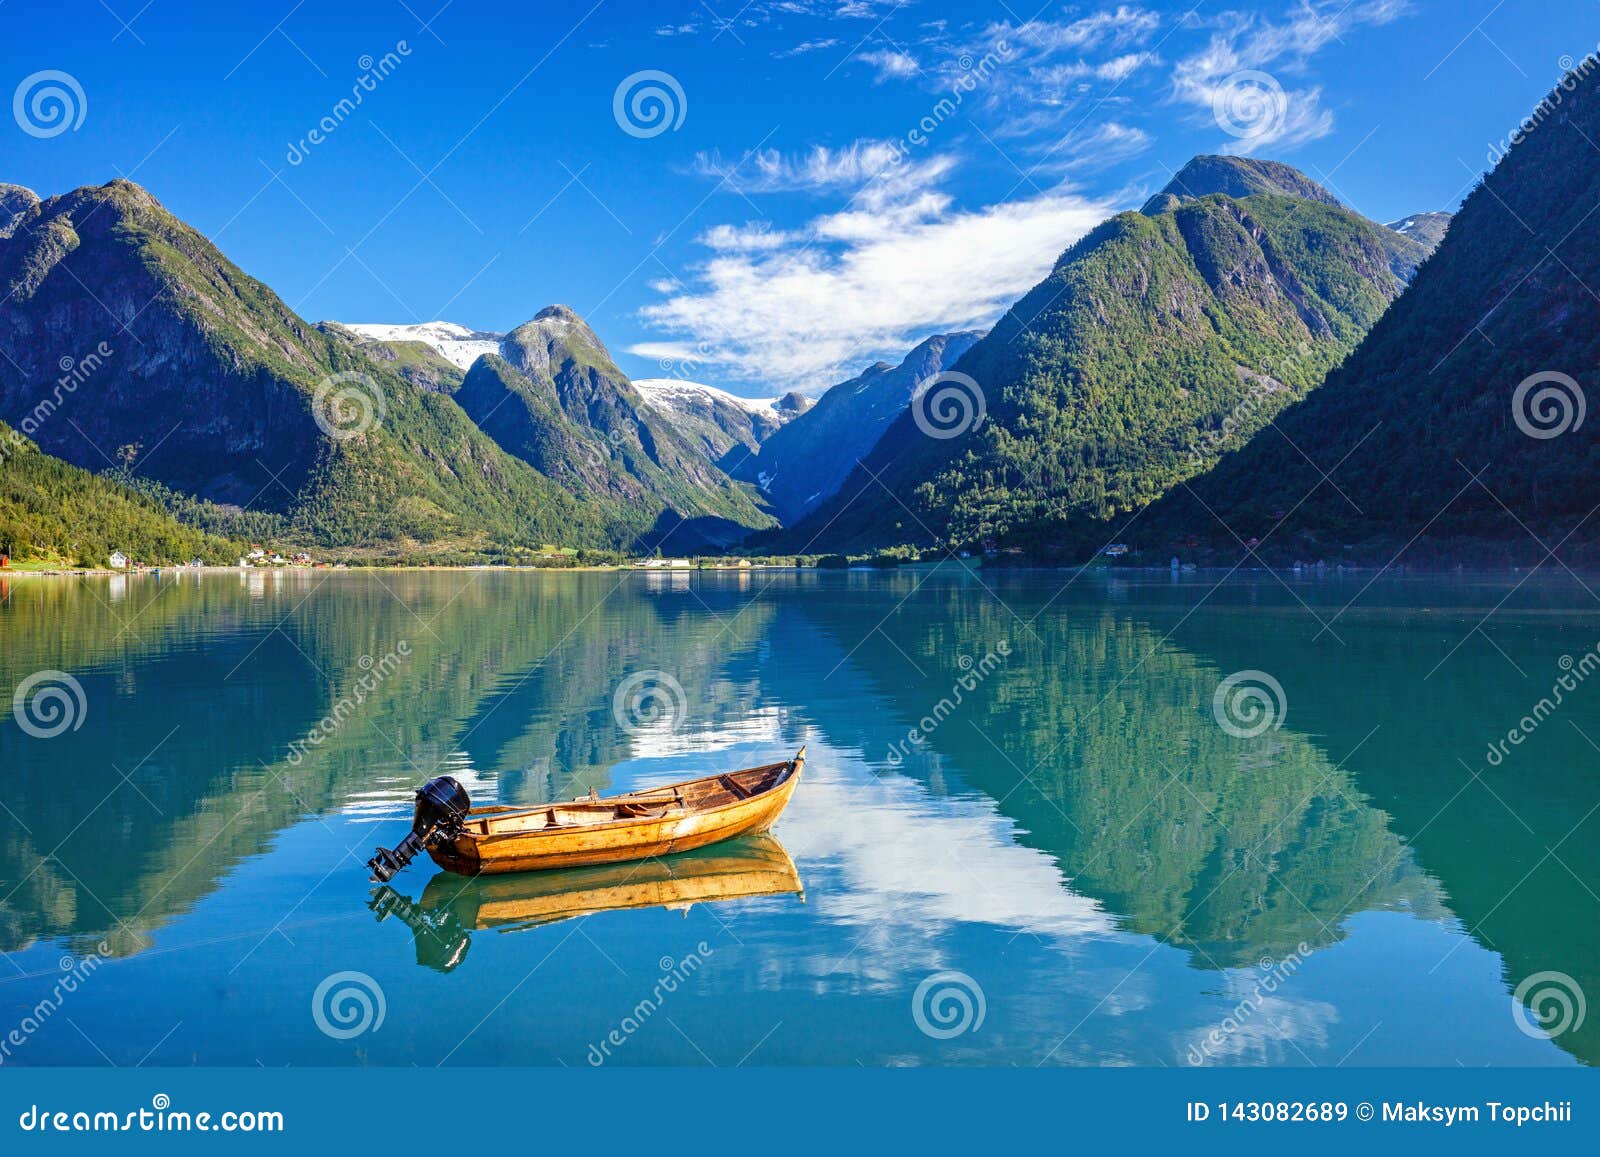 Beautiful Nature Norway Natural Landscape with Fjord, Boat and Mountain ...